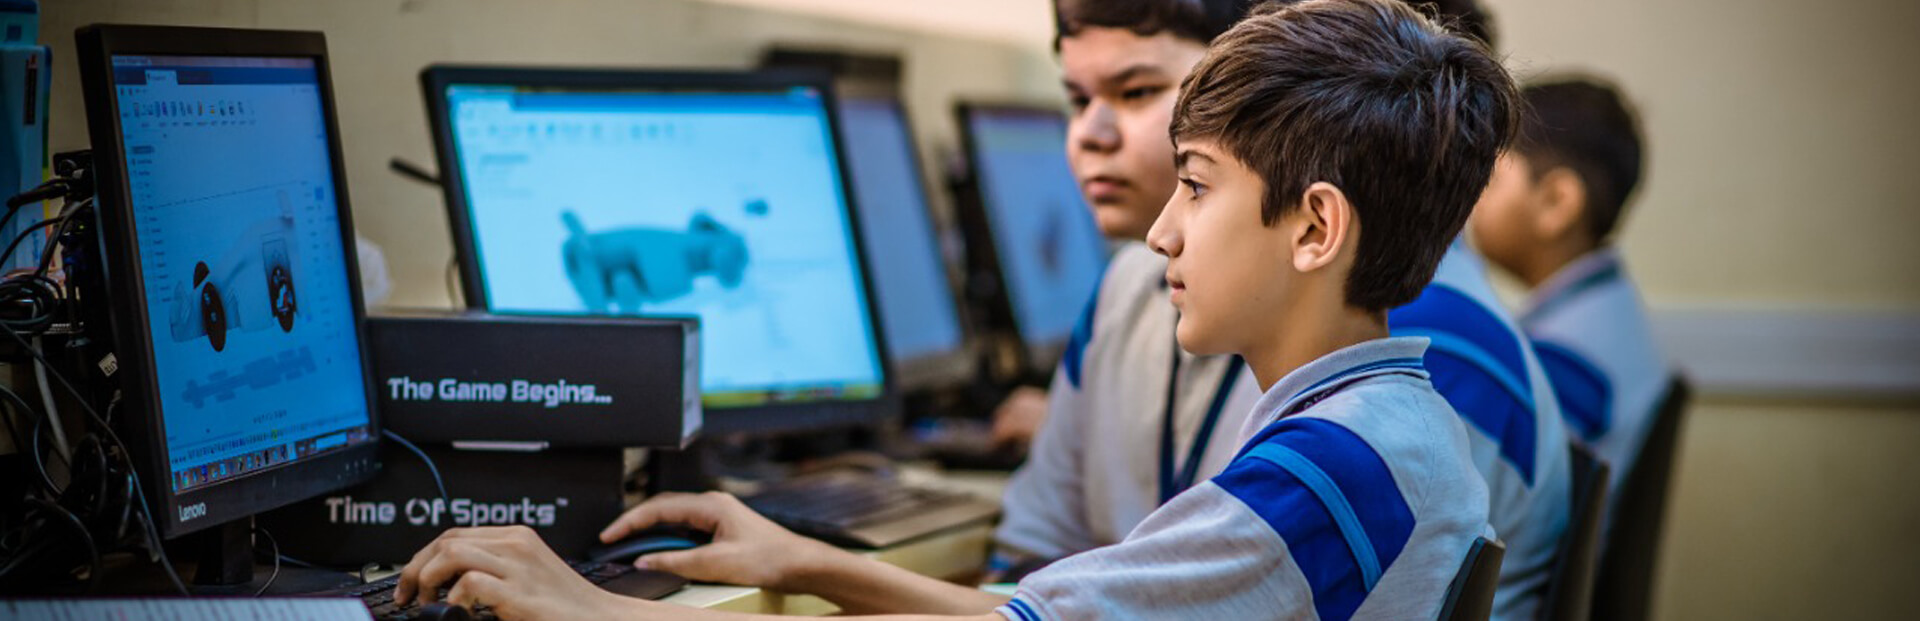 Inclusive Education in the Digital Age – Opportunities and Challenges